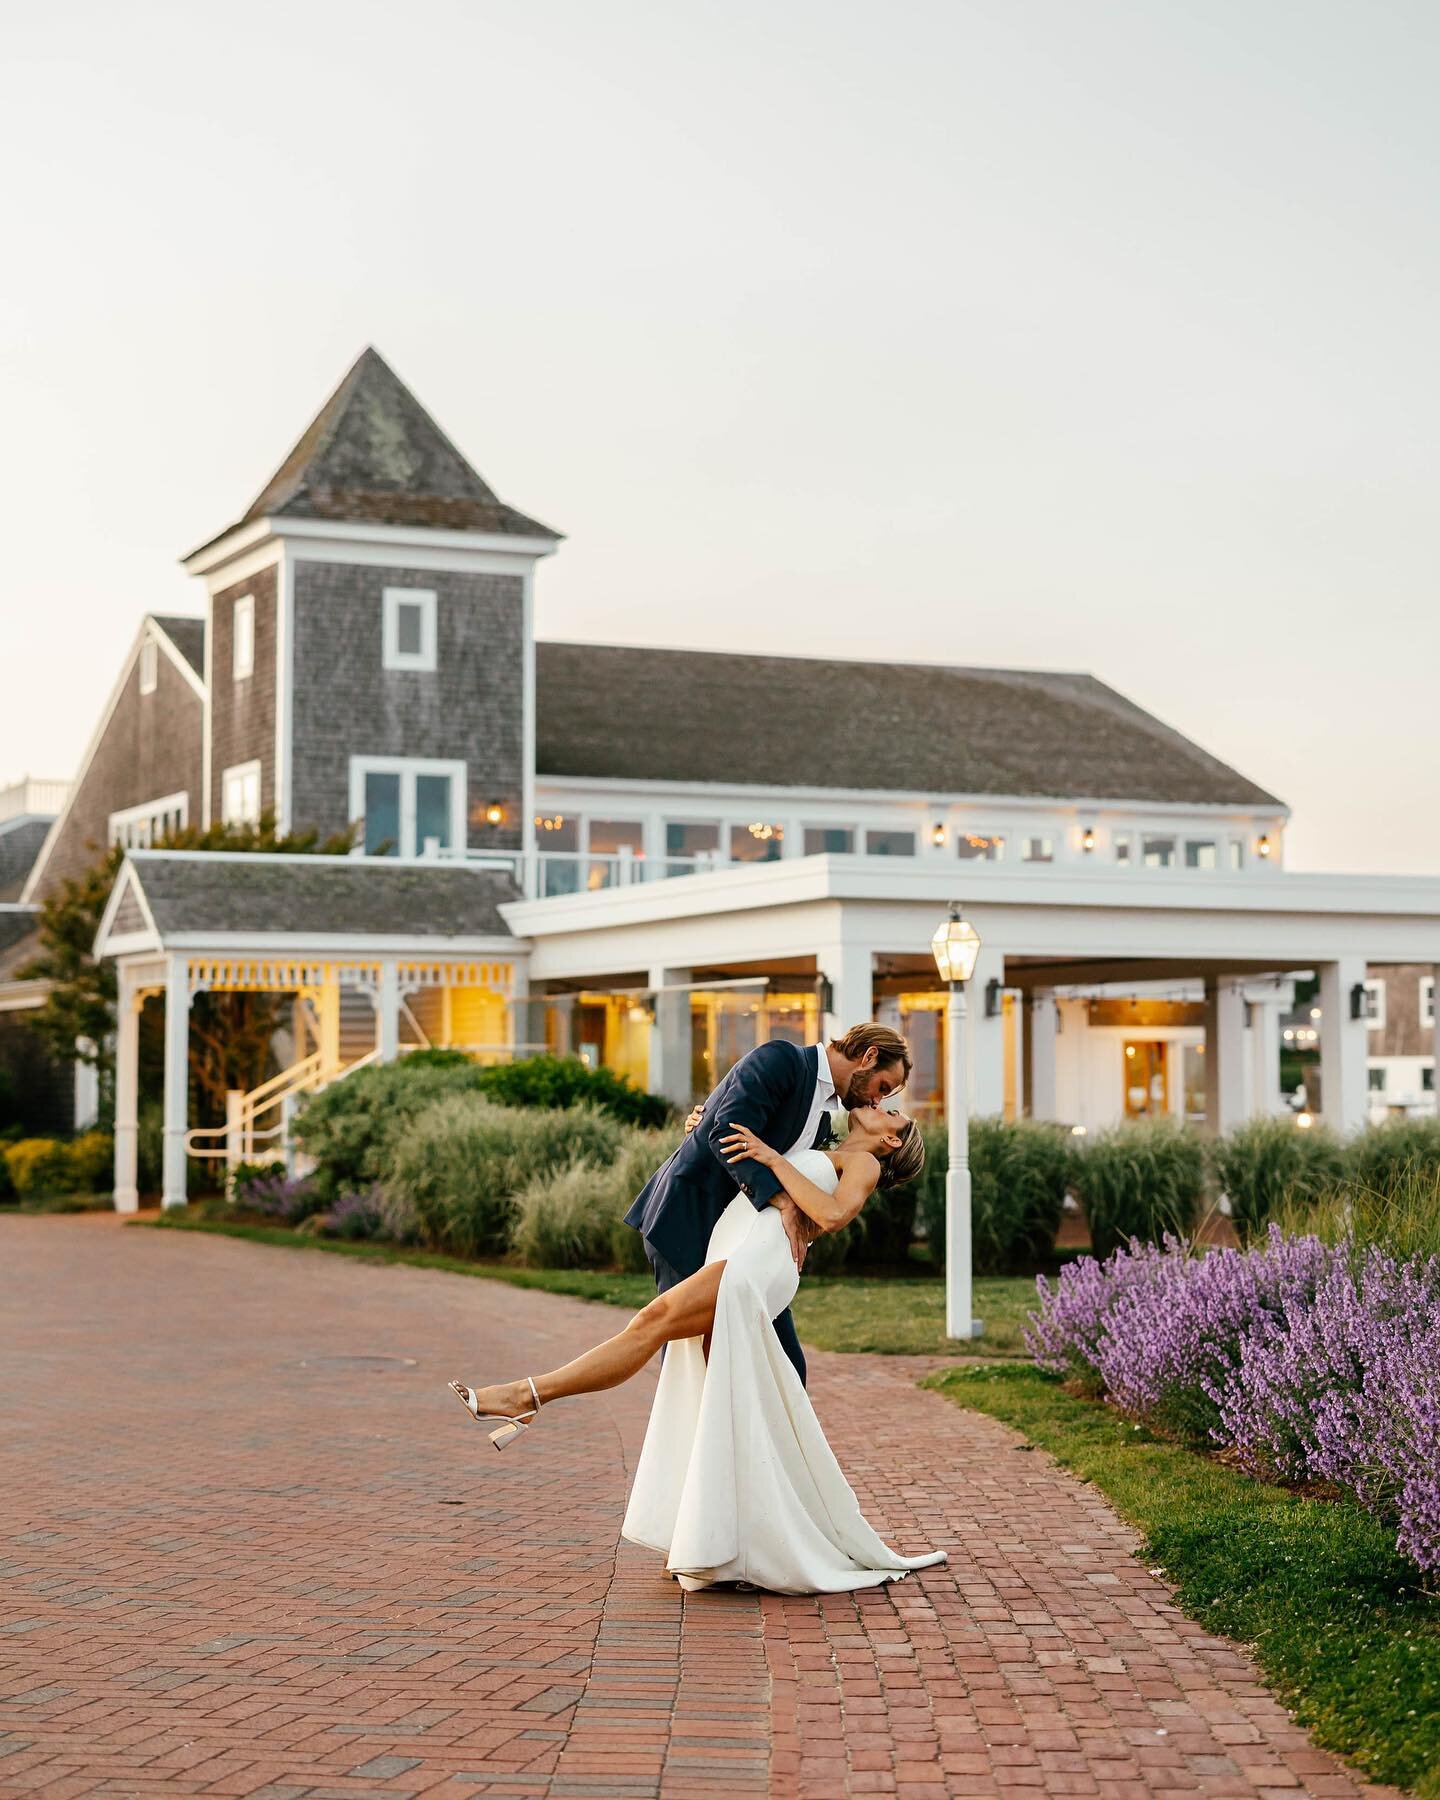 A lovely coastal summer wedding on Cape Cod 🌊 

So much fun second shooting this one with @merrisacarolinephotography